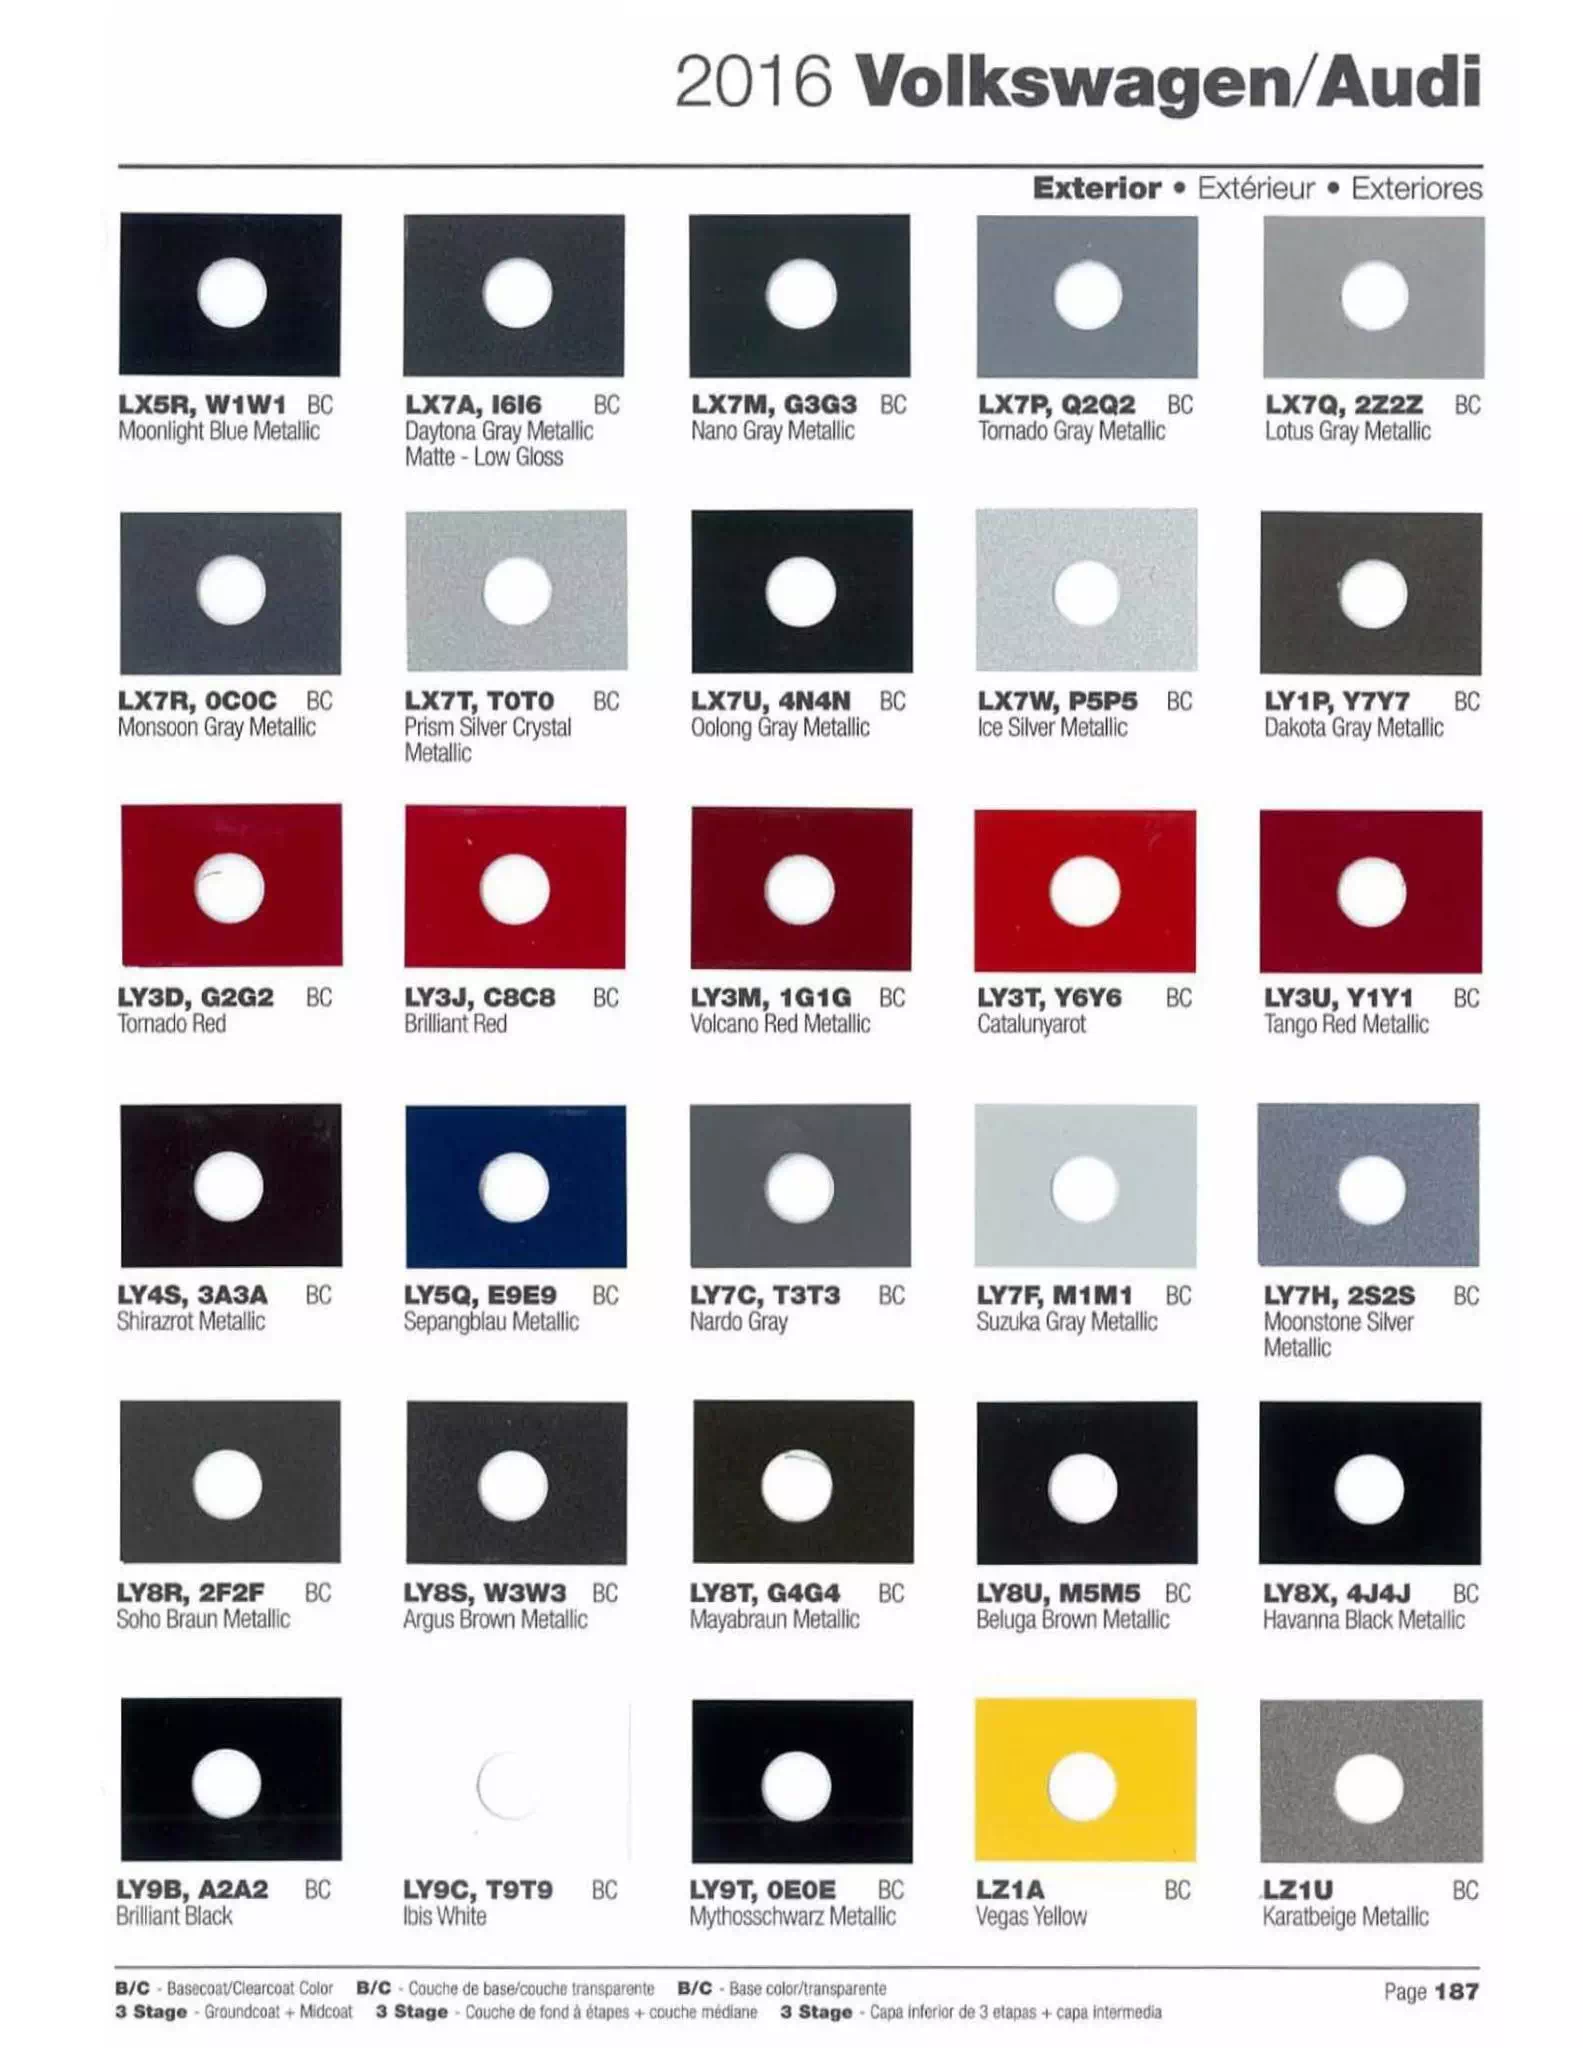 Exterior Colors Used on Volkswagen and Audi on 2016